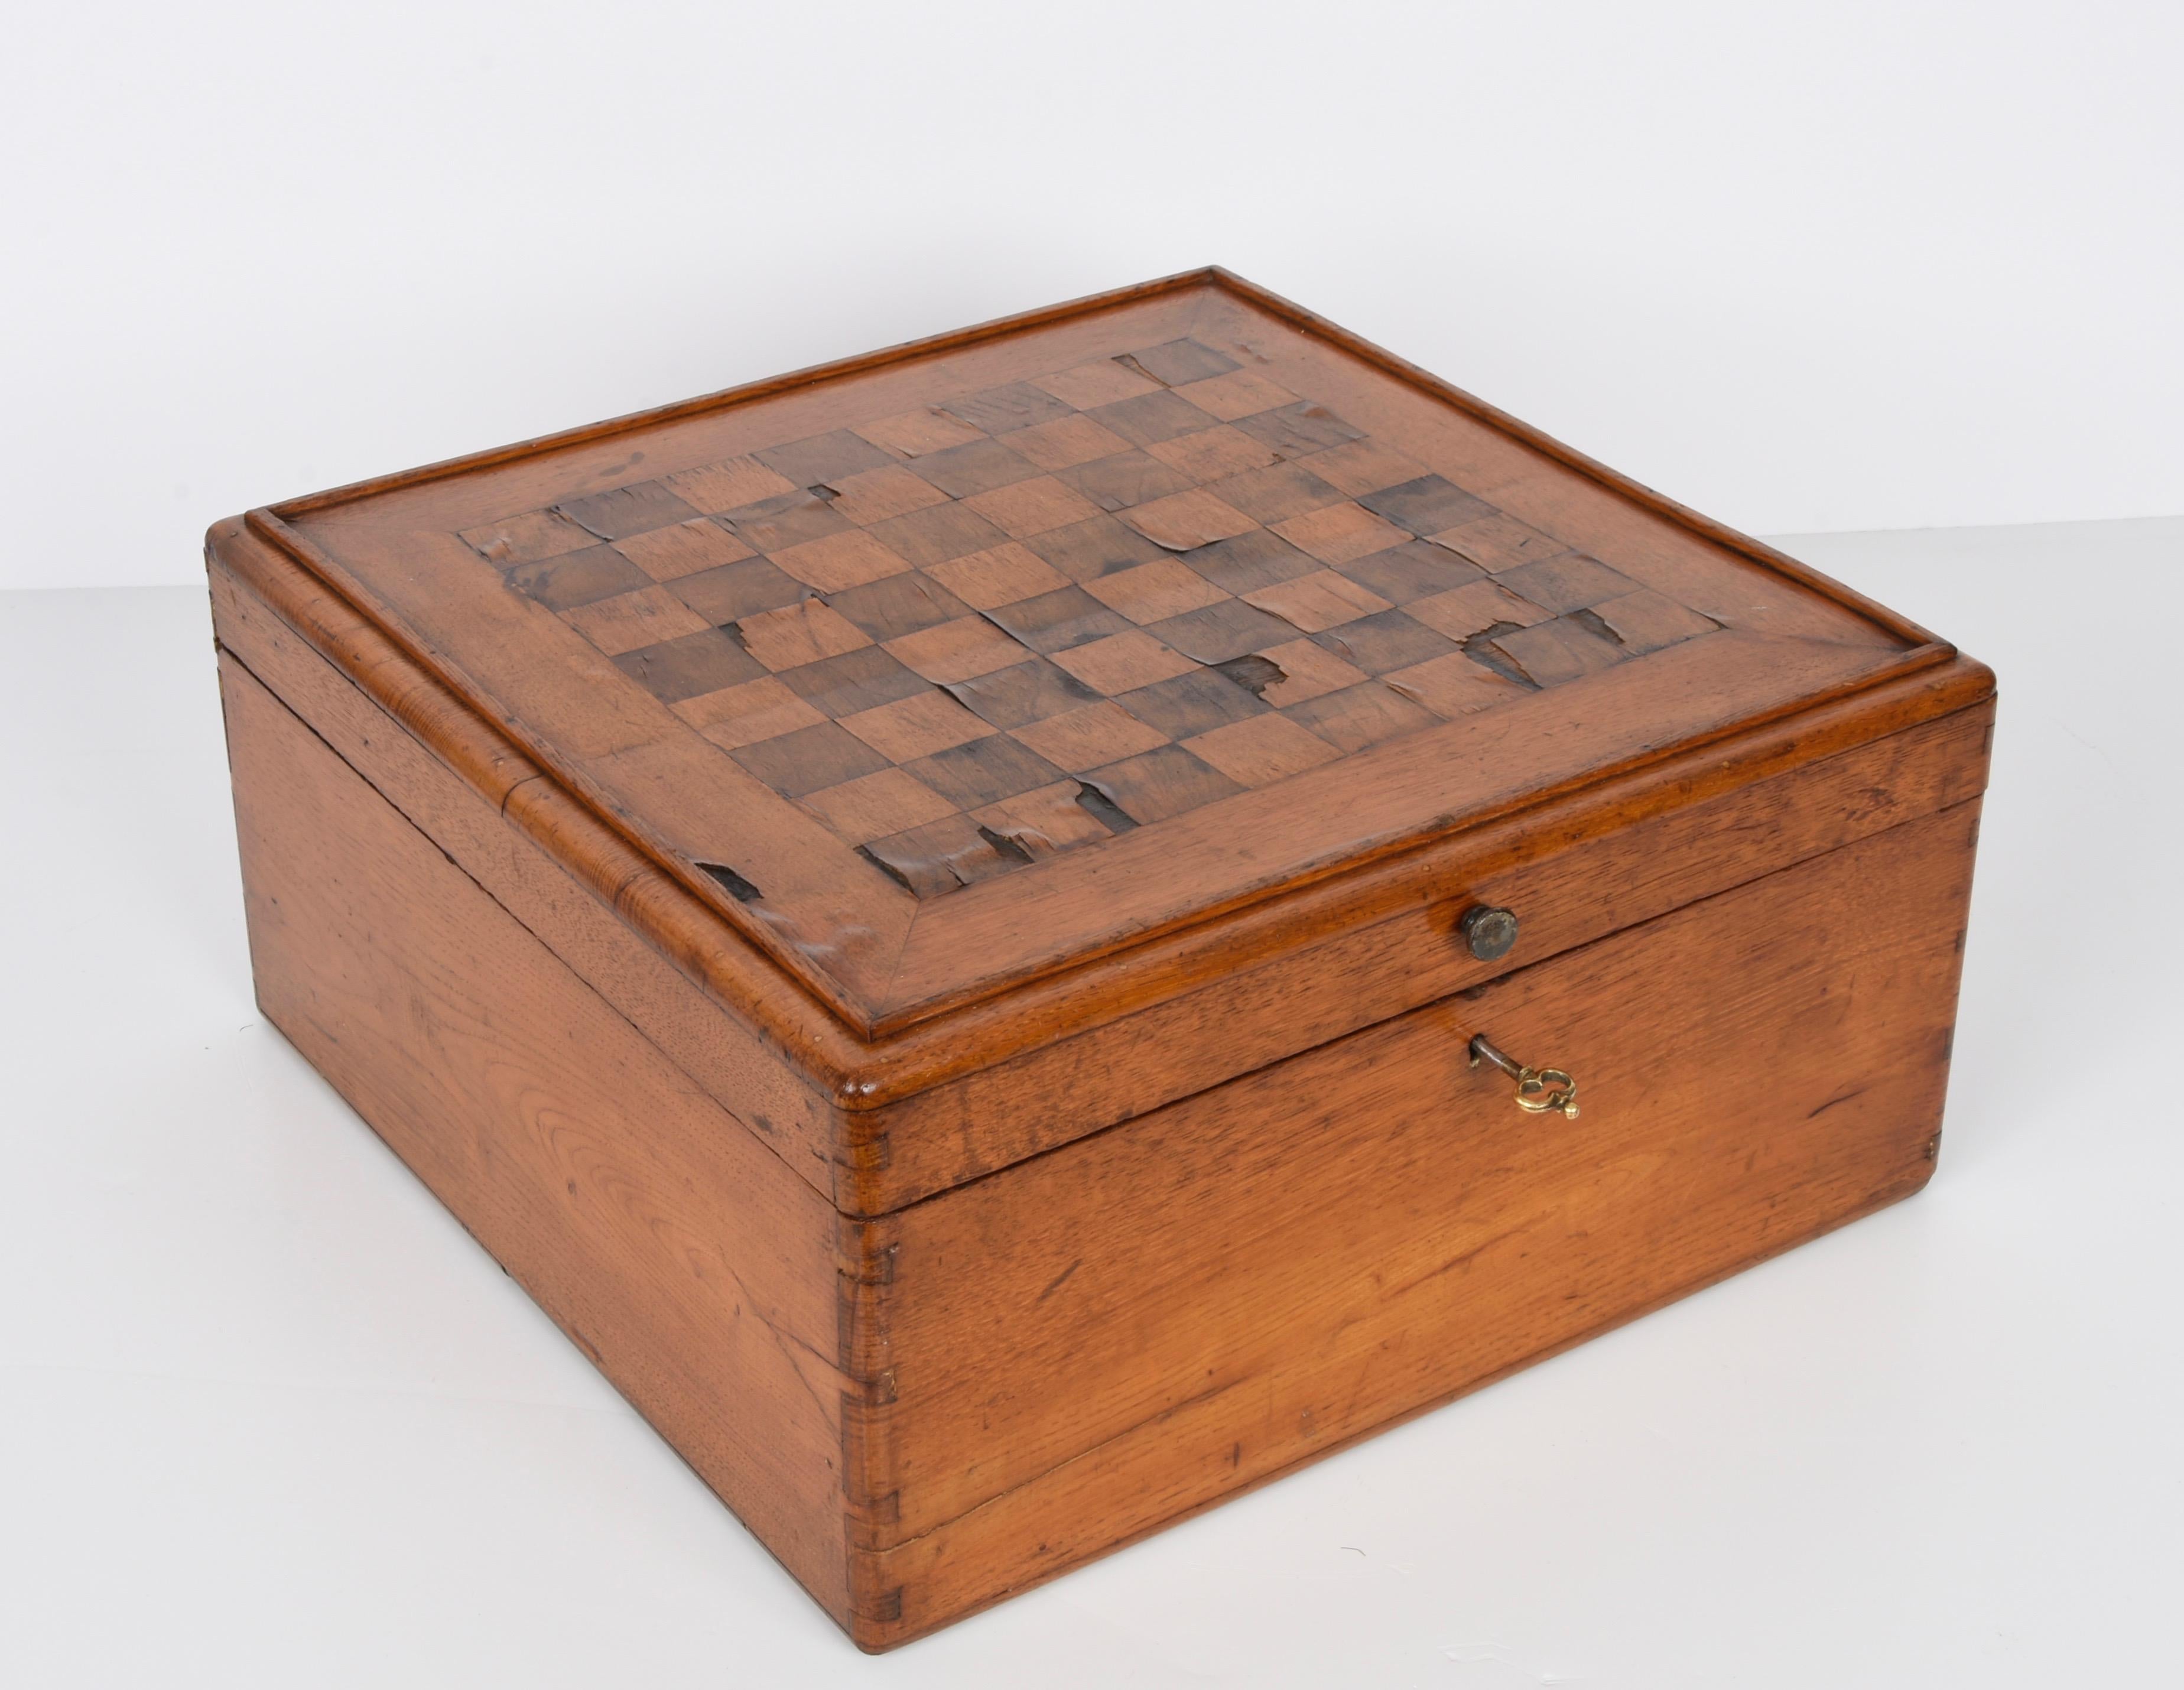 Early 20th Century Large Wooden Inlaid Squared Italian Chessboard Box, 1900s For Sale 9